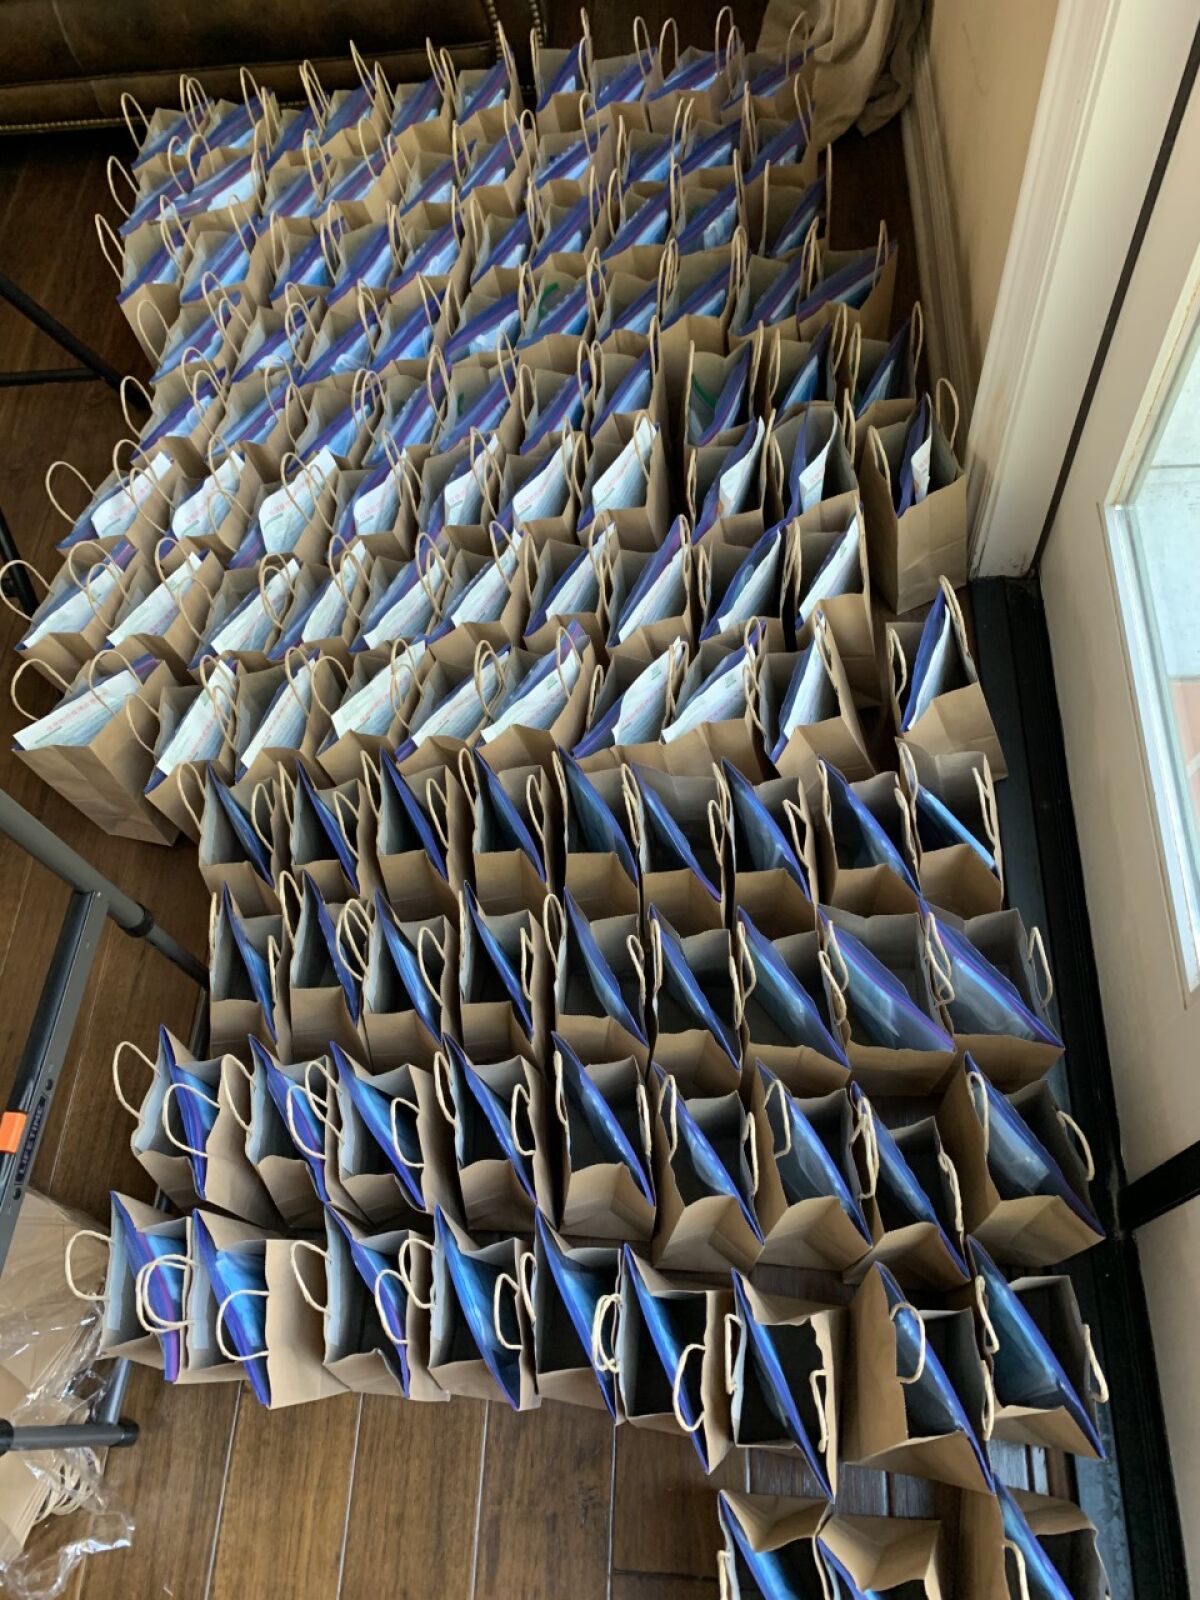 Masks packed to be given out for free.